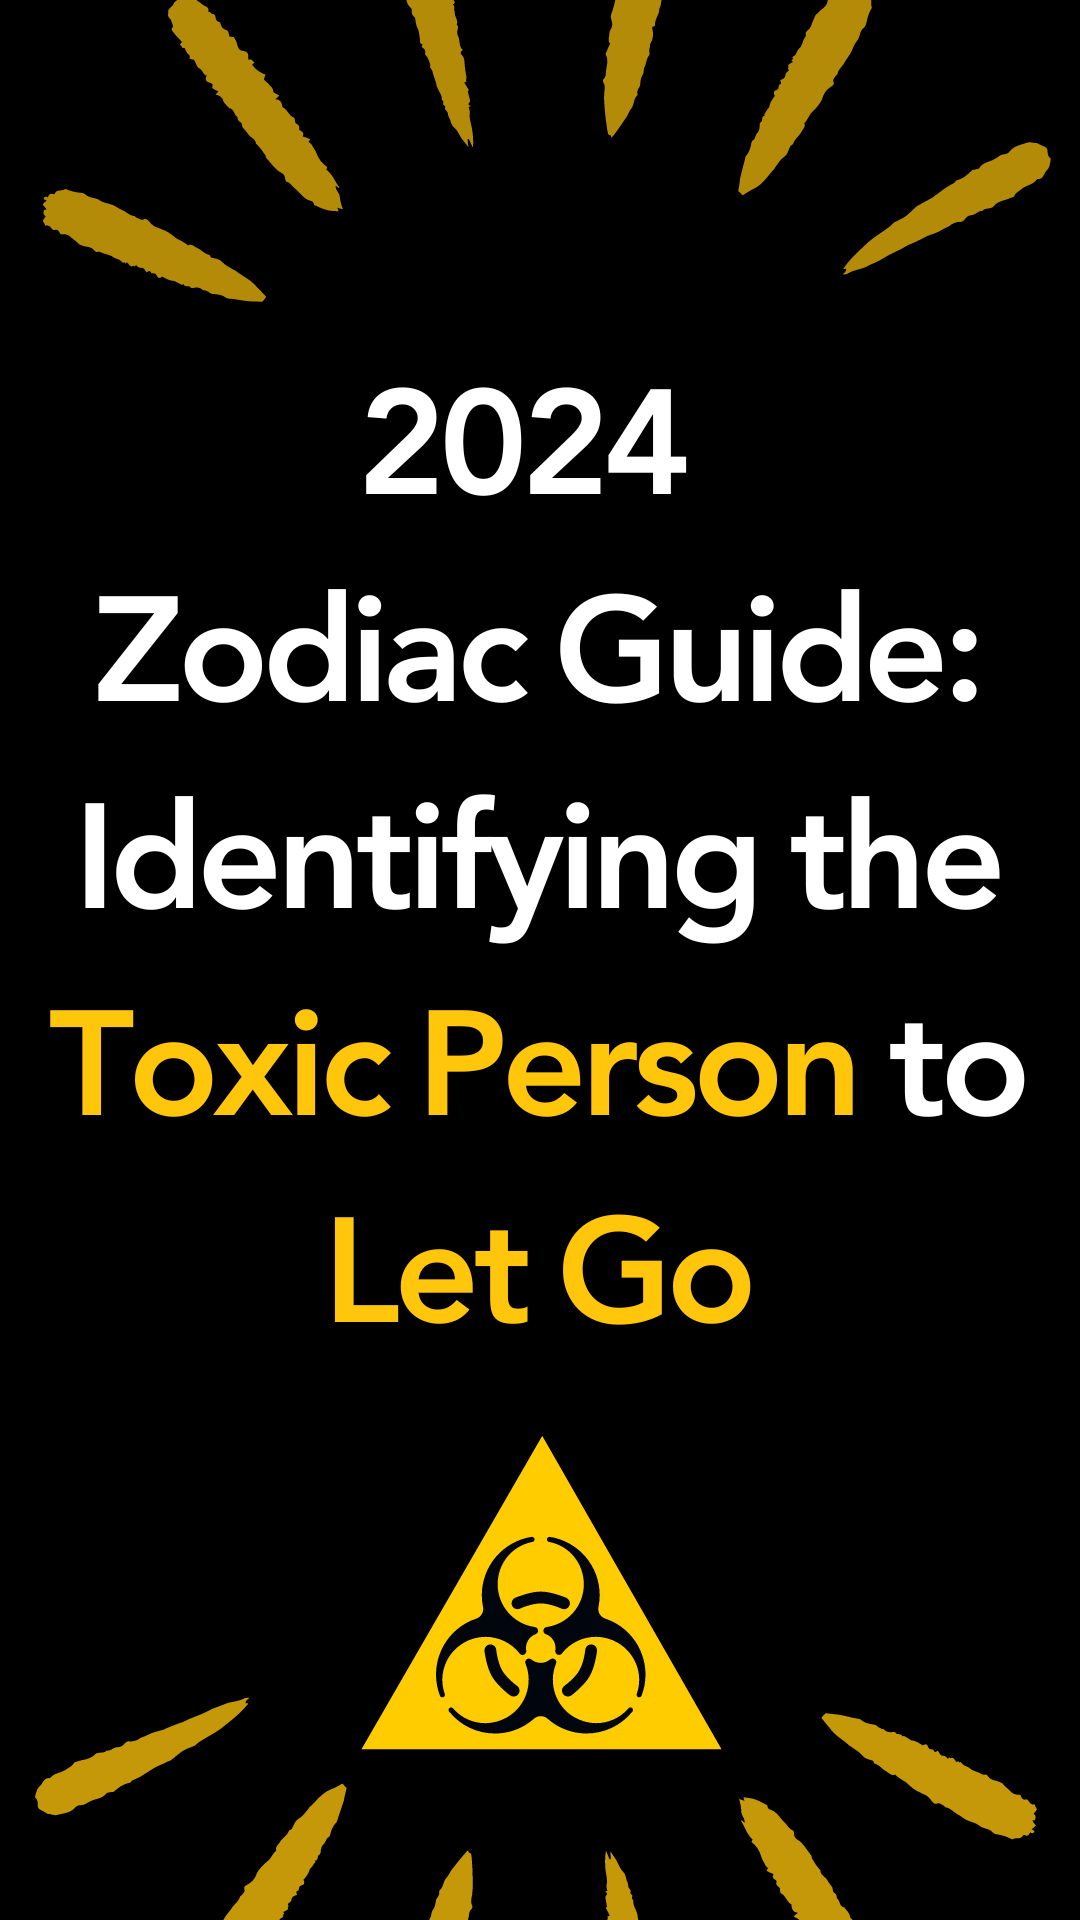 2024 Zodiac Guide: Identifying the Toxic Person to Let Go